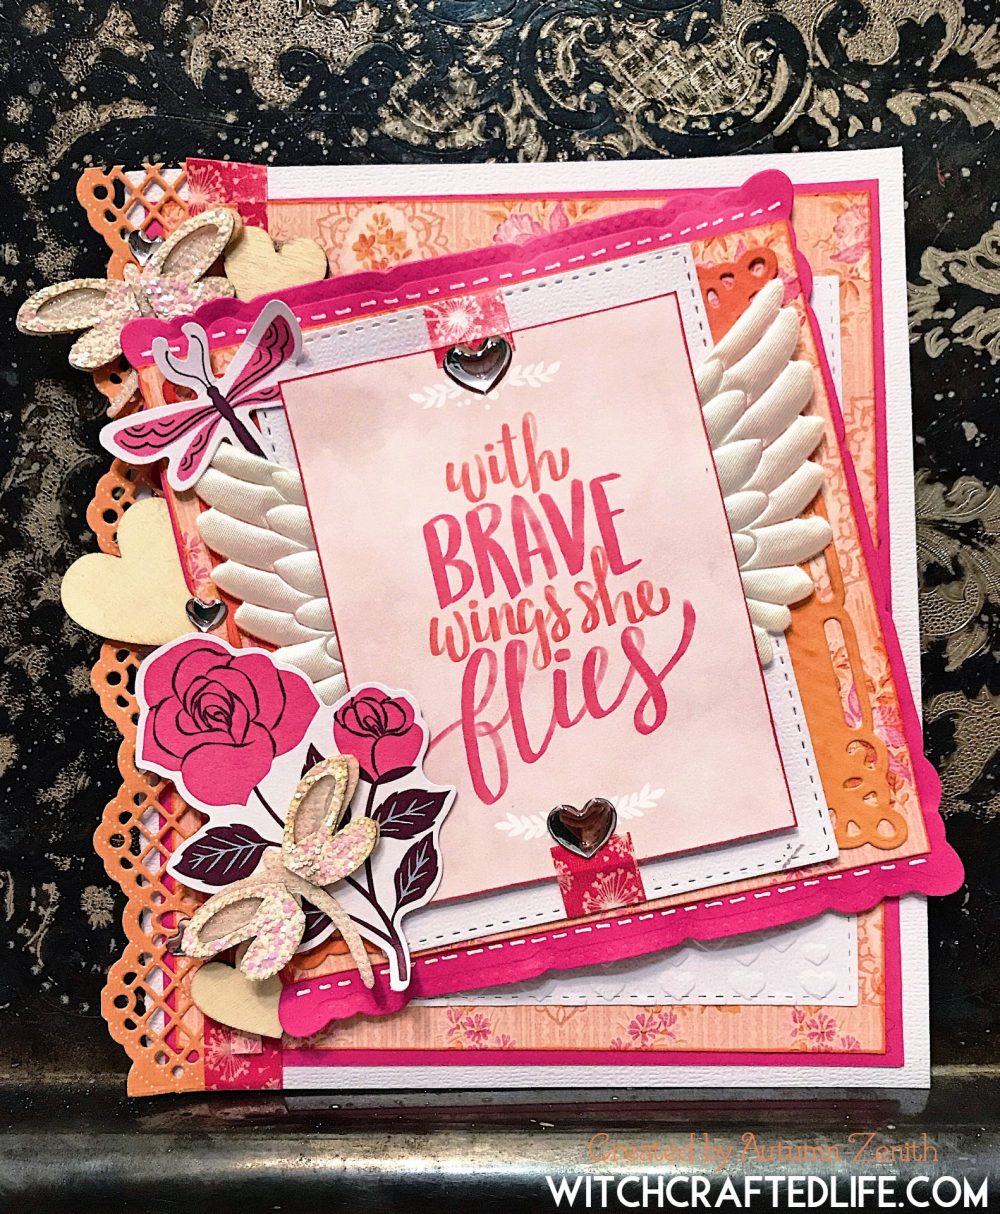 With Brave Wings She Flies encouragement card